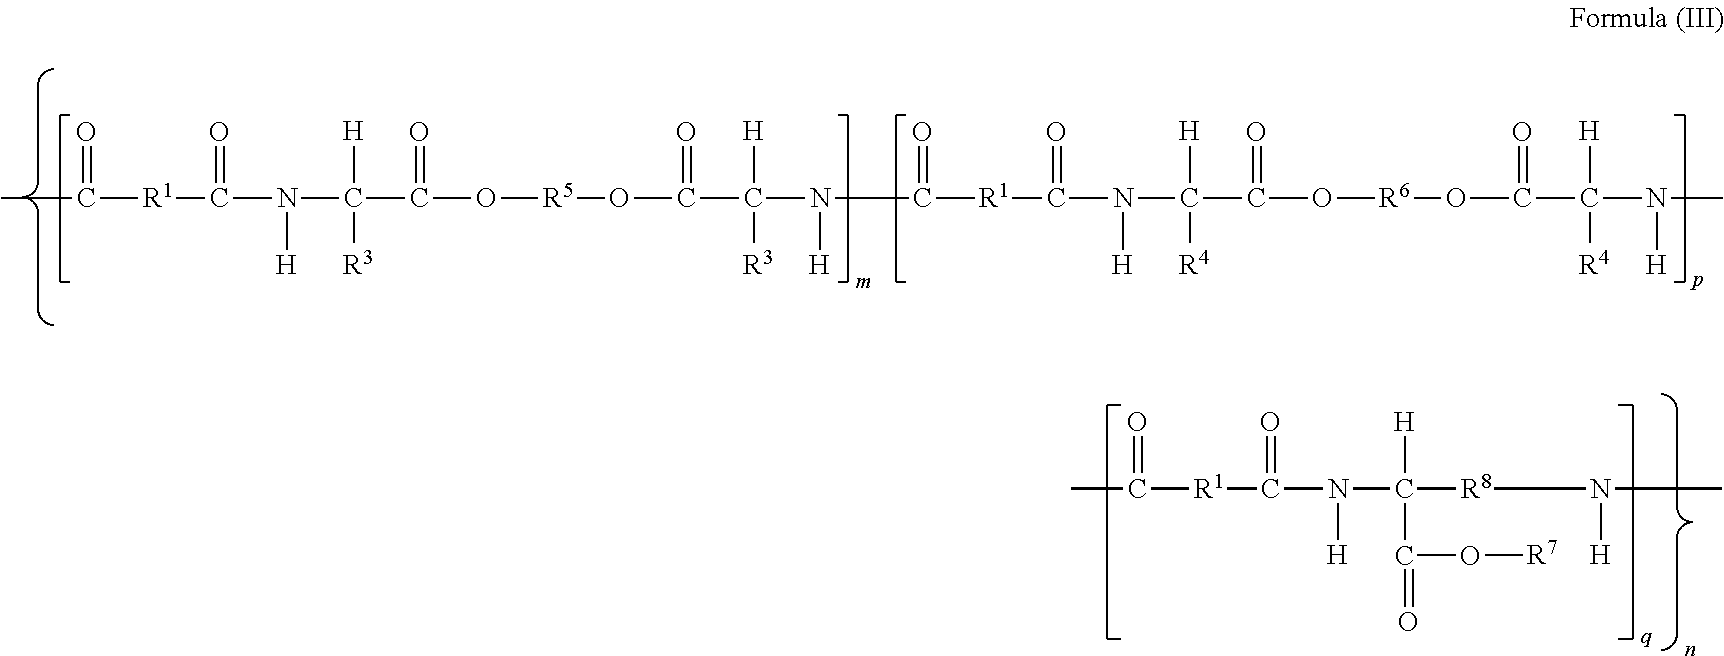 Bis-(alpha-amino)-diol-diester-containing poly (ester amide) and poly (ester urethane) compositions and methods of use